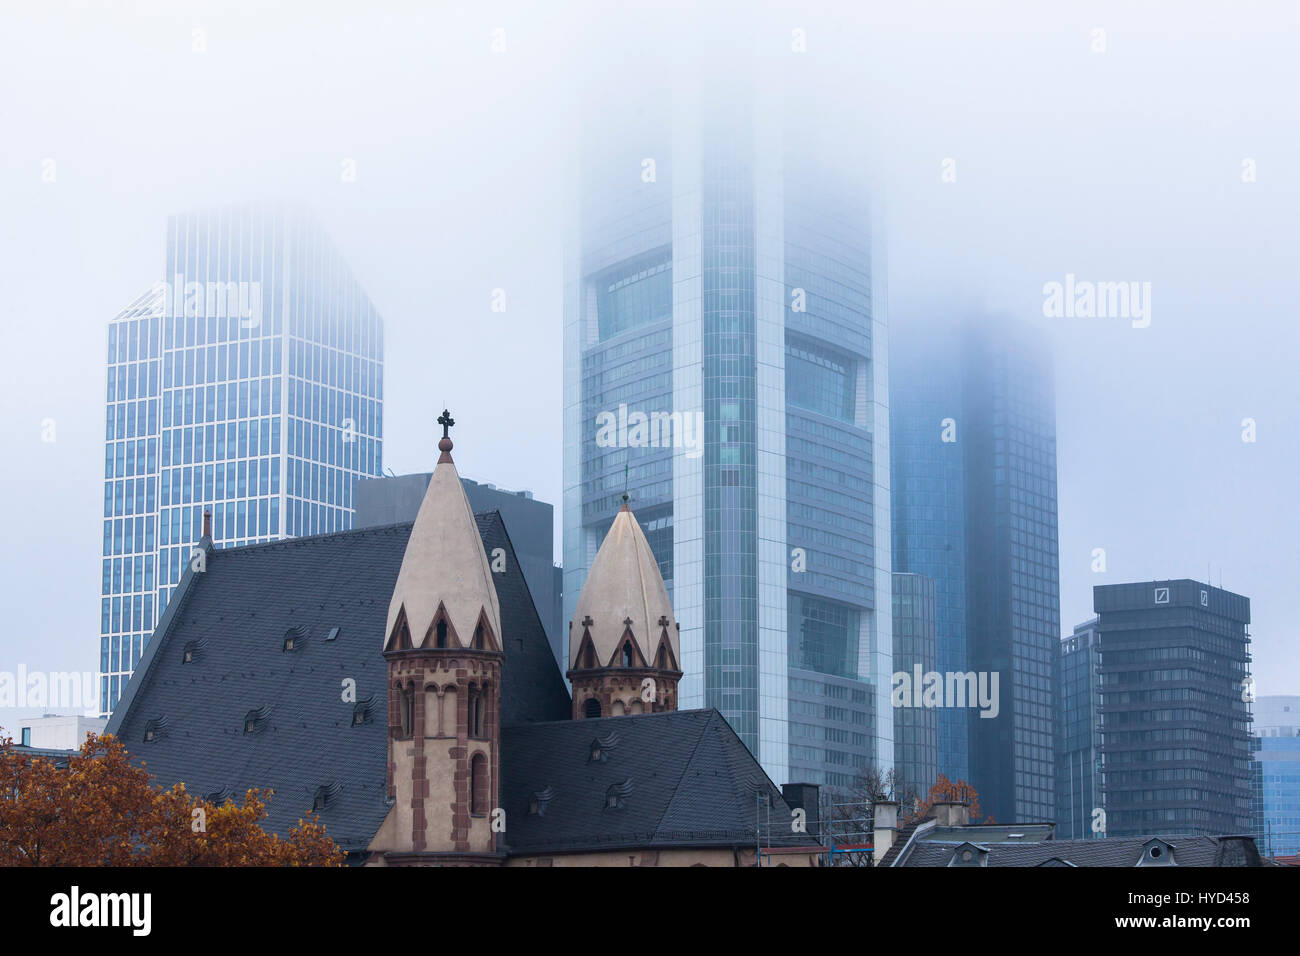 , Germany, Hesse, Frankfurt, St. Leonhards church in front of the skyscrapers of the financial district, fog. Stock Photo